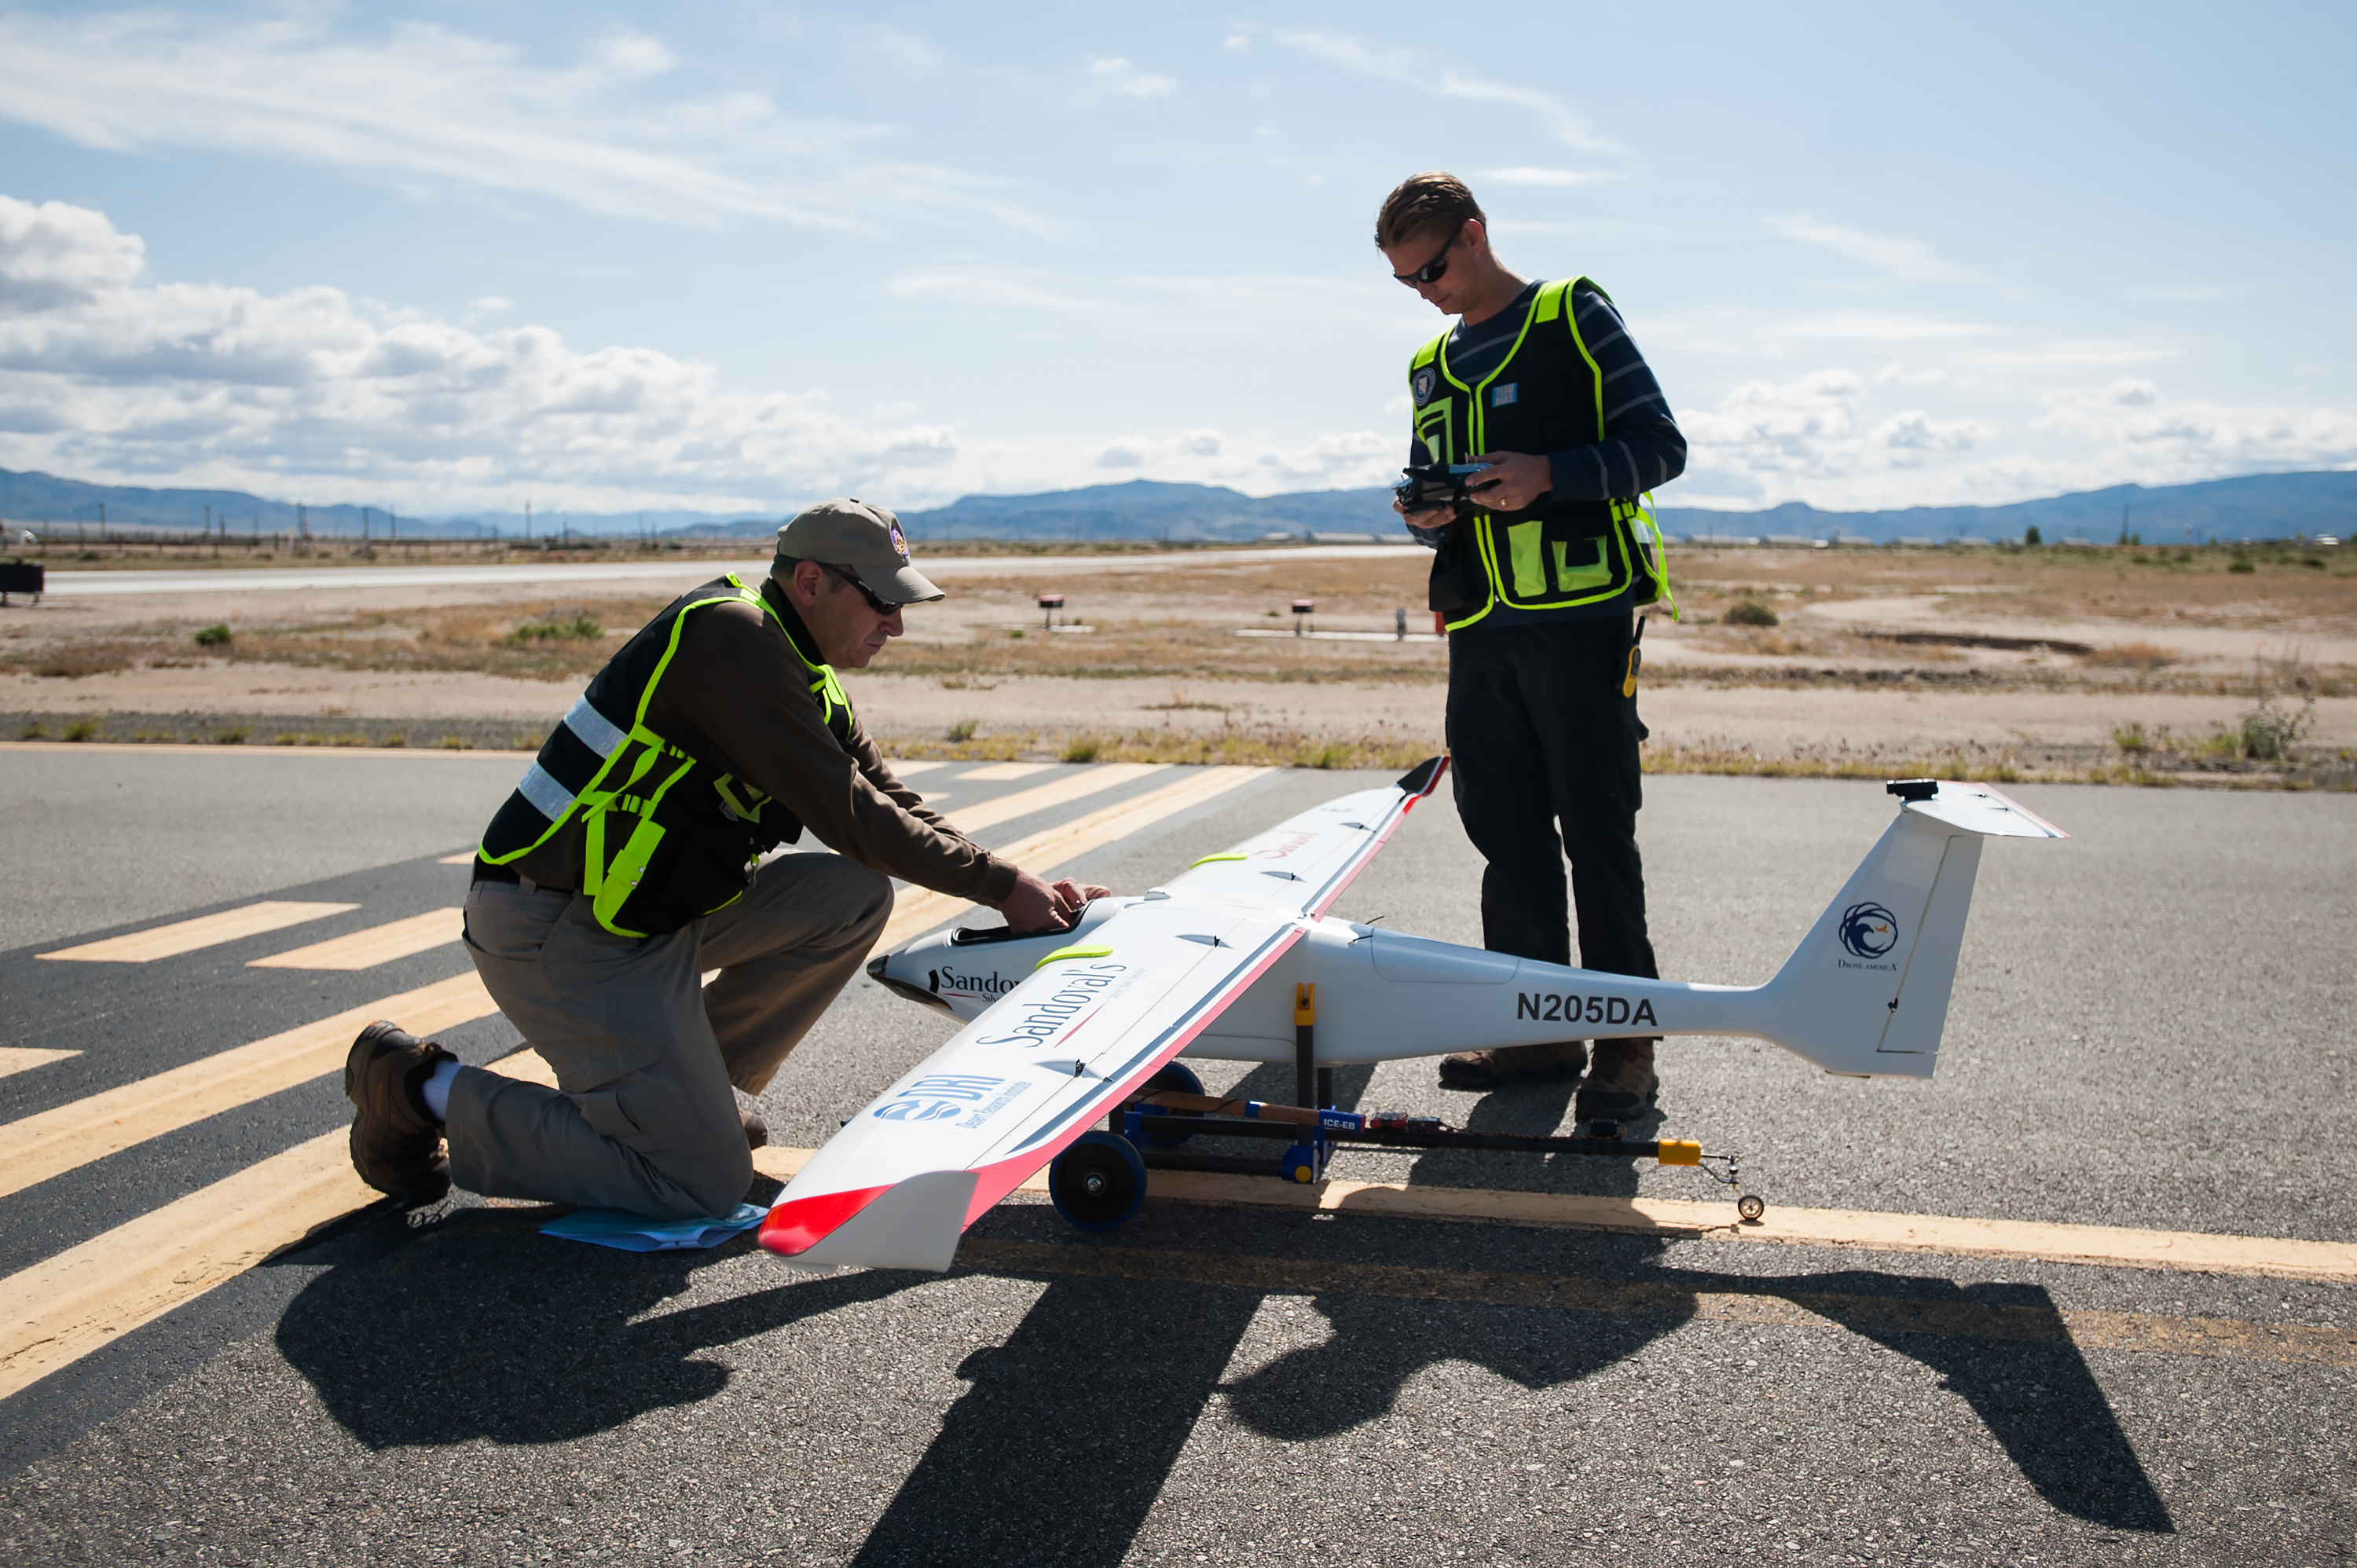 Savant drone used to seed clouds in Nevada desert